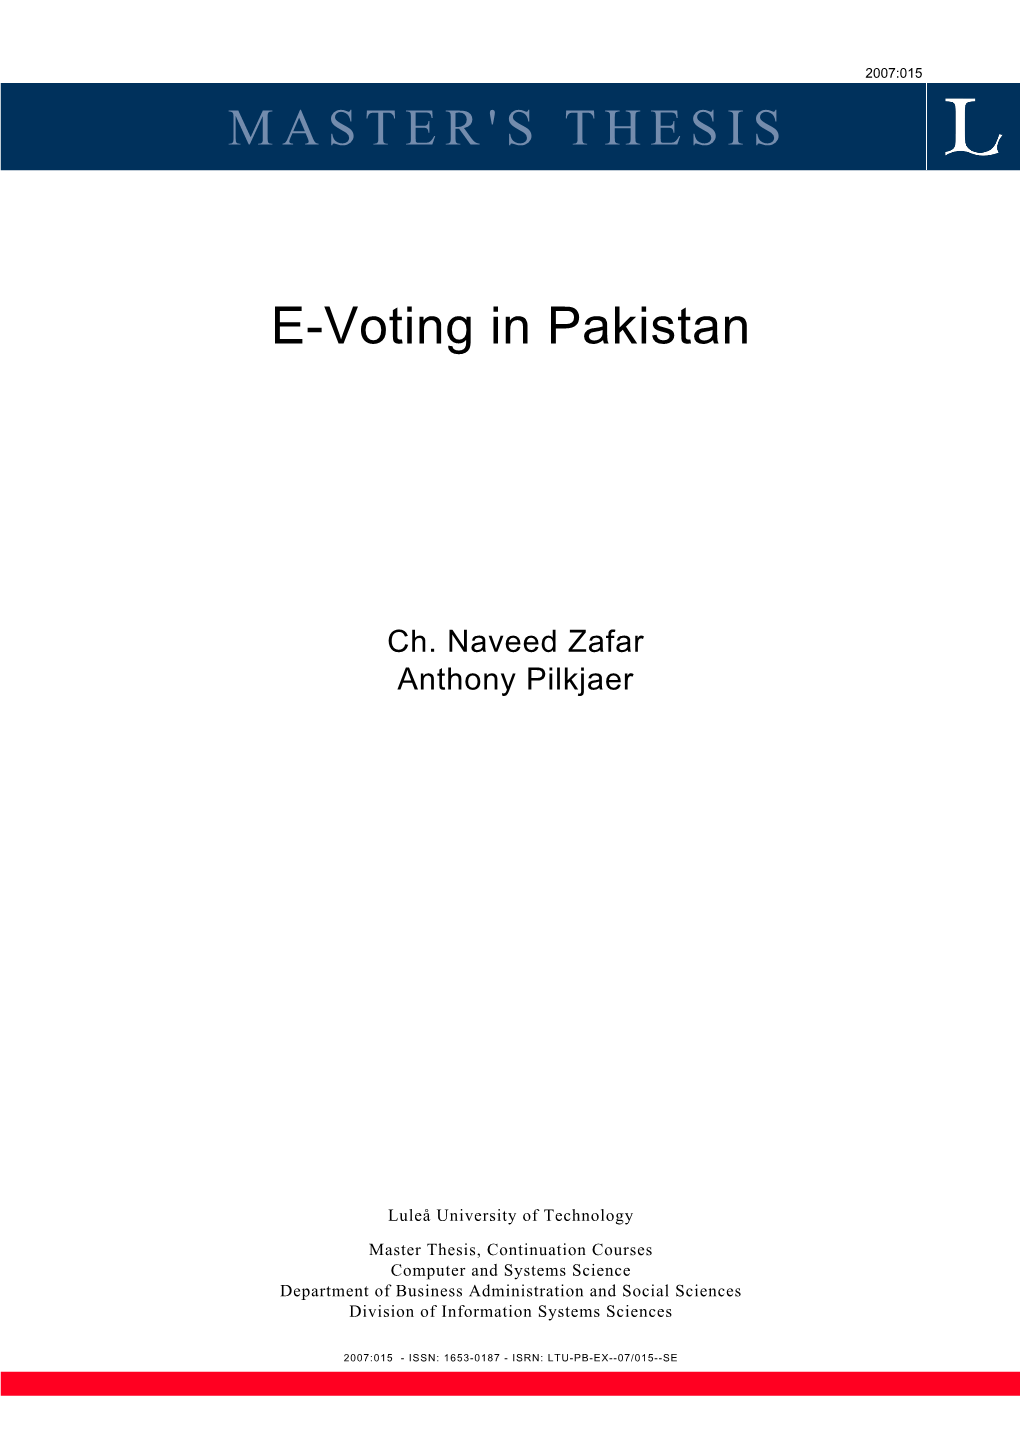 MASTER's THESIS E-Voting in Pakistan